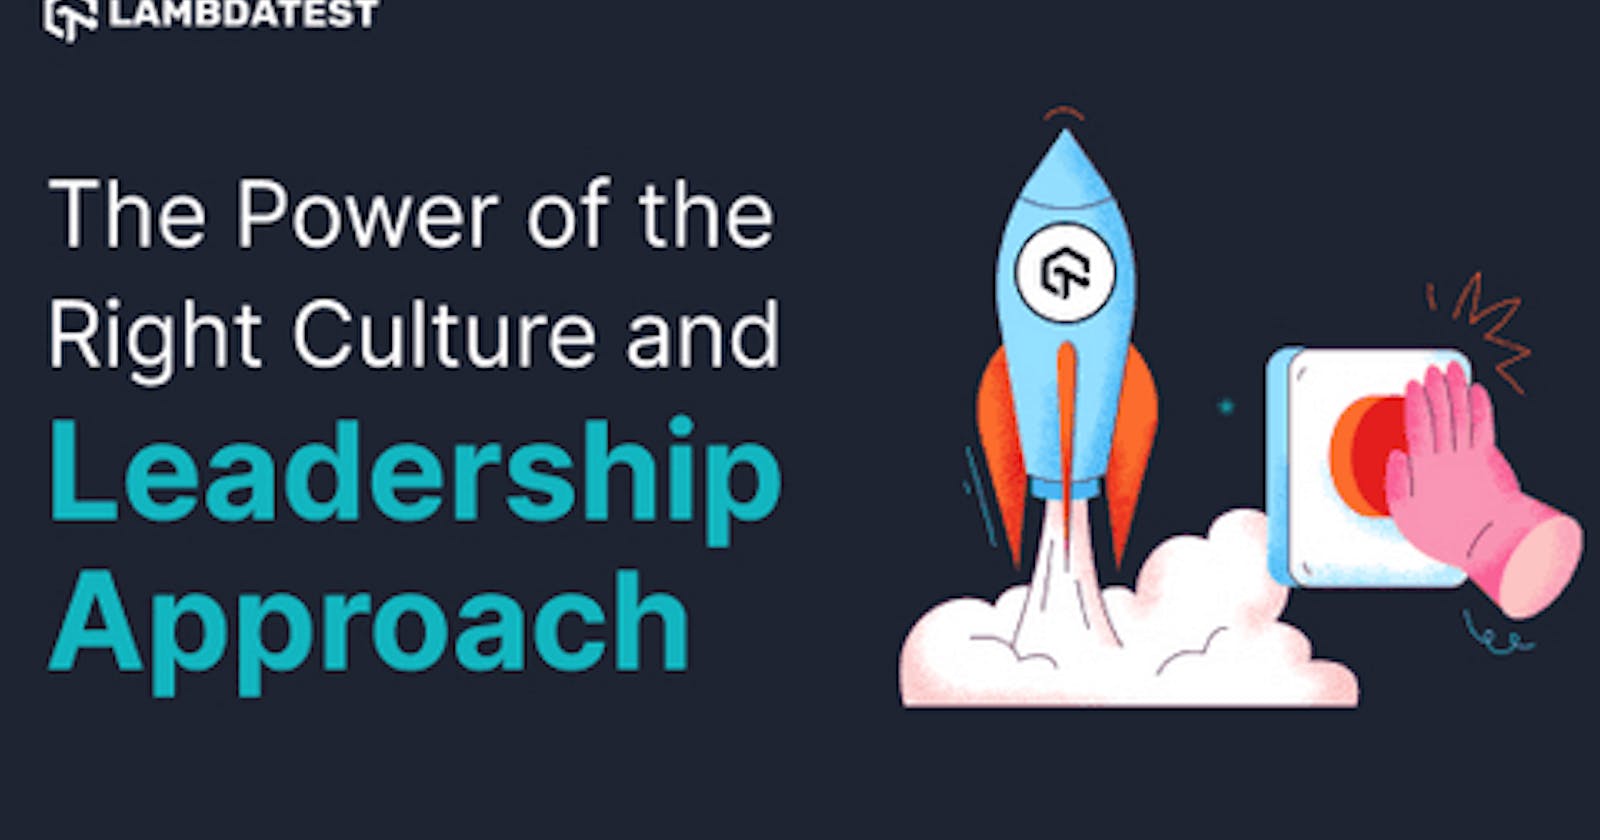 The power of the right culture and leadership approach